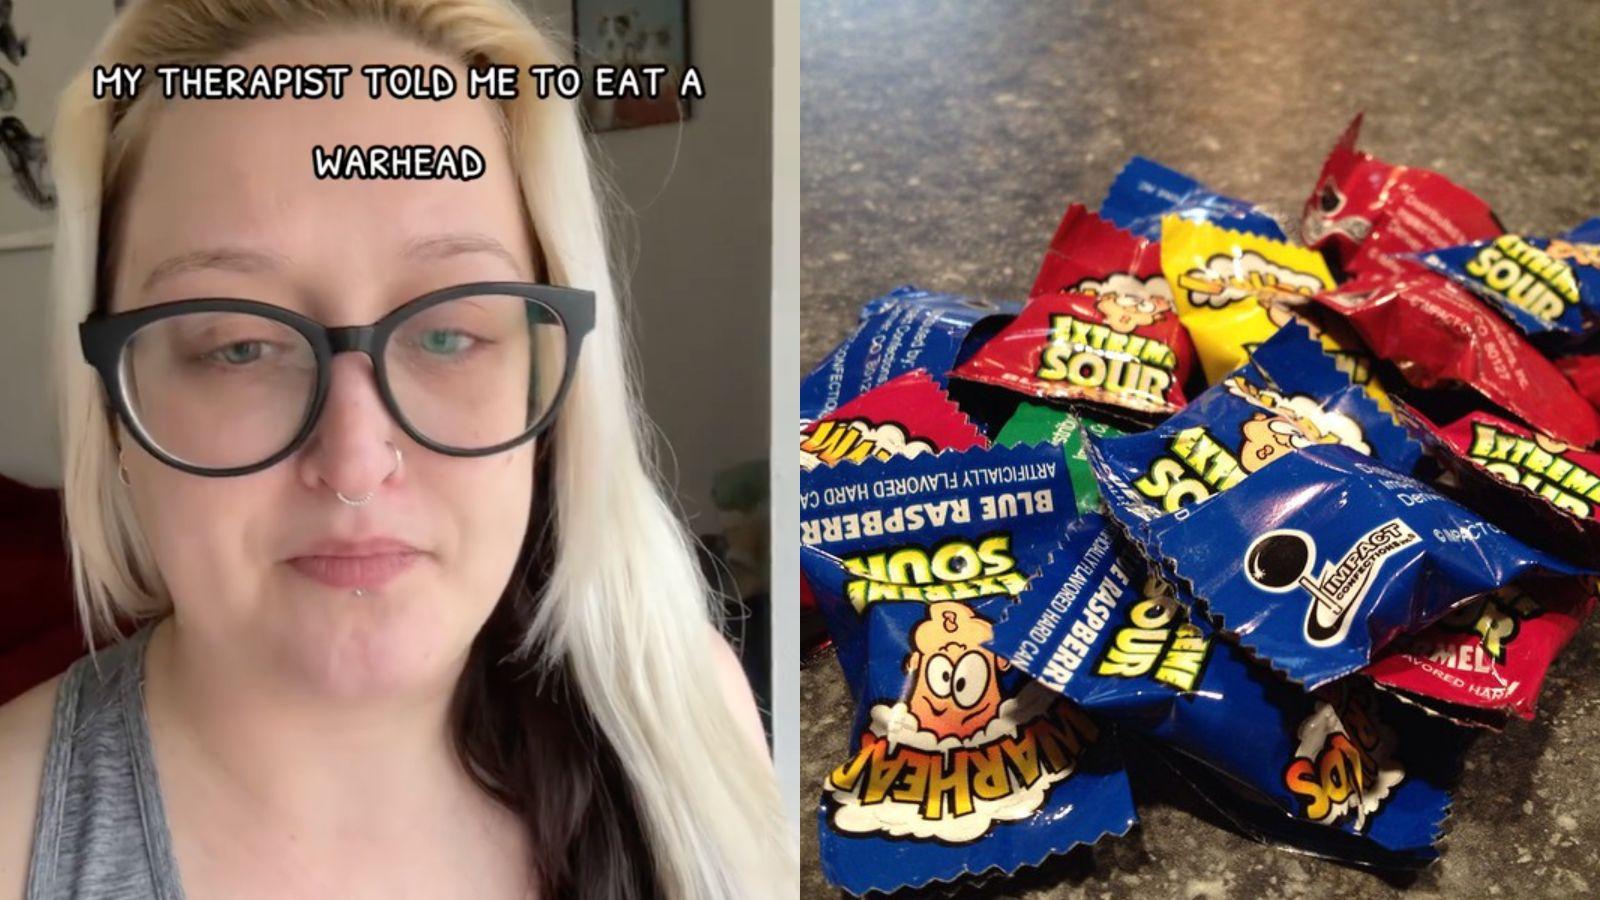 People are told to ear Warheads to help with panic attacks